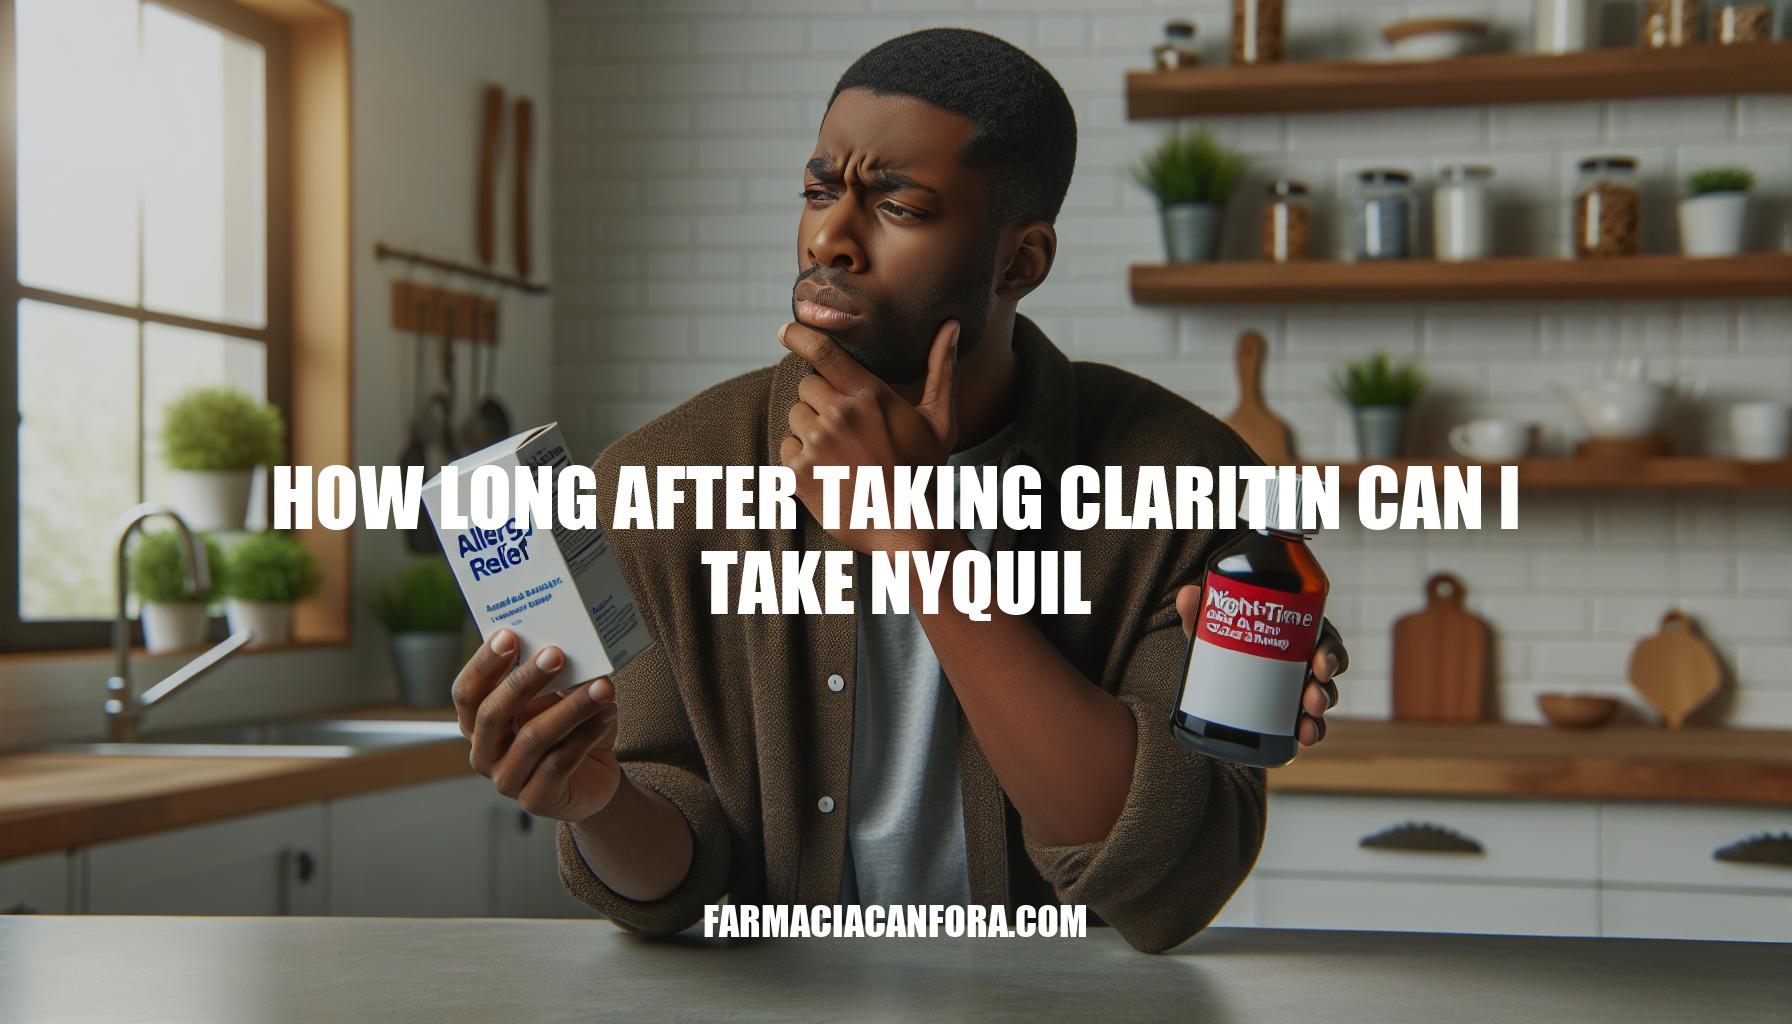 How Long After Taking Claritin Can I Take Nyquil